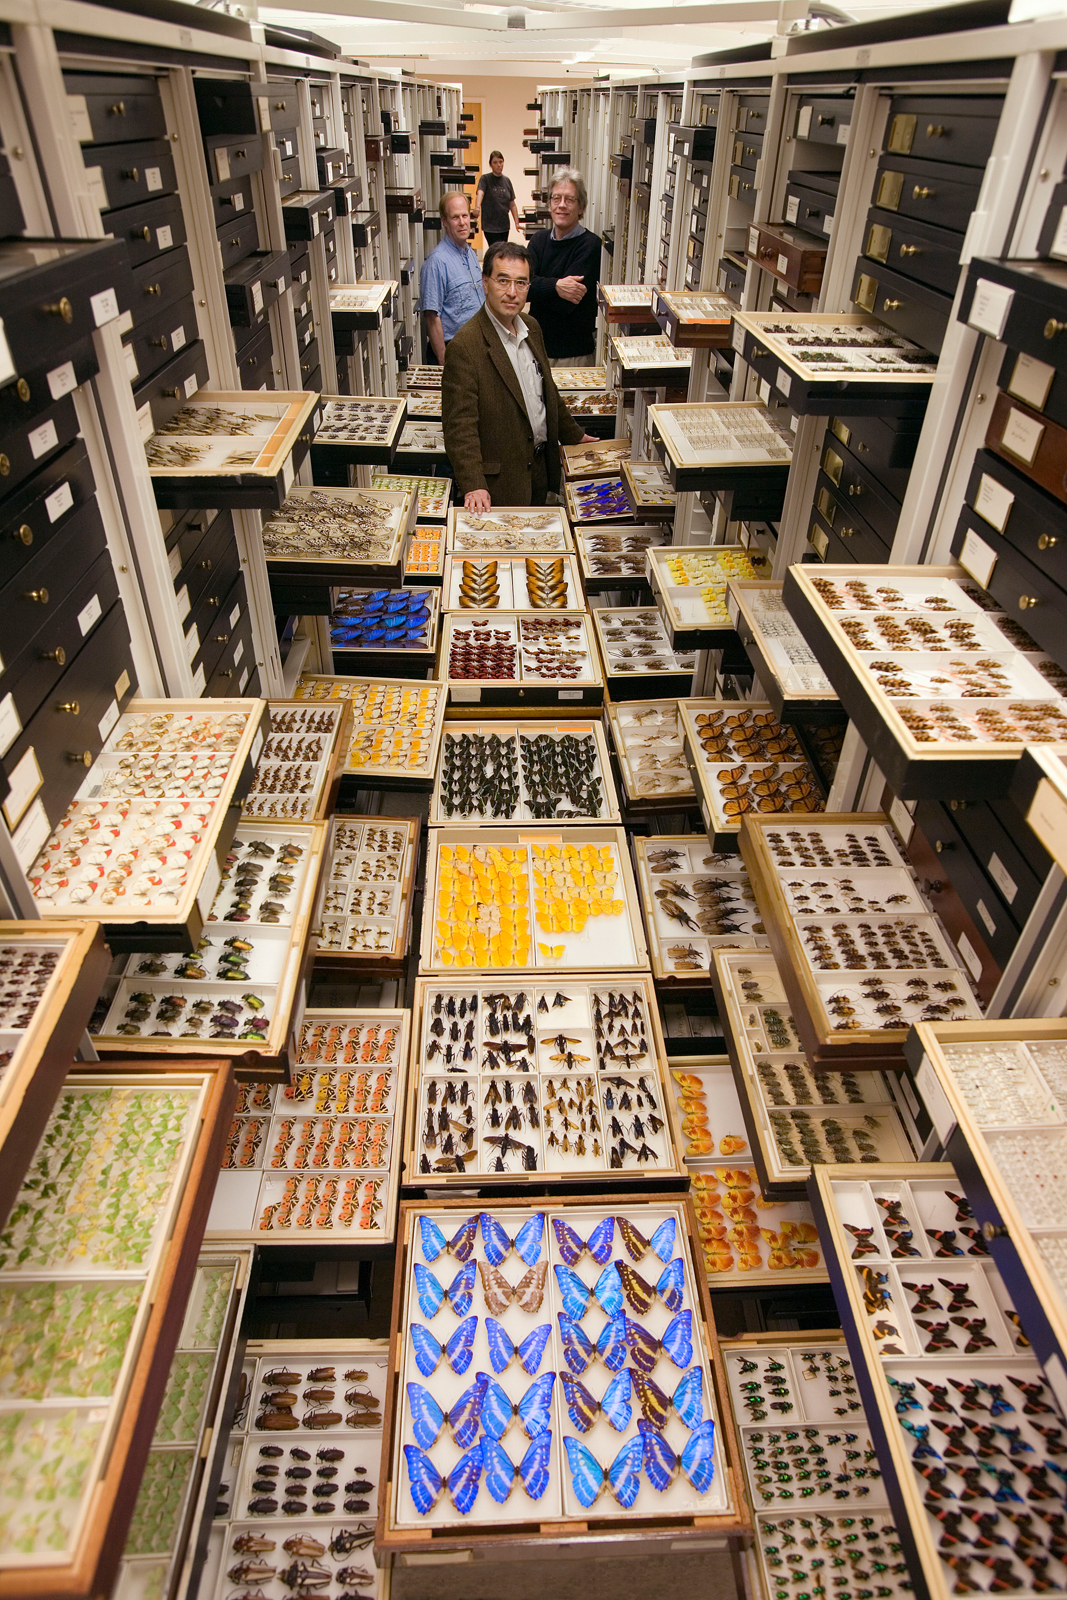 A presentation of entomology specimens arranged within one aisle of the Entomology Department compactor collection cabinets at the Smithsonian Institution's National Museum of Natural History.  Designed to illustrate the size and scope of the Entomology collection. May 9, 2006. Featured researchers:  Dr. David Furth, Collections Manager;  Dr. Ted Schultz, Research Entomologist;  Dr. Jonathan Coddington, Senior Scientist;  Patricia Gentili-Poole, Museum Technician.